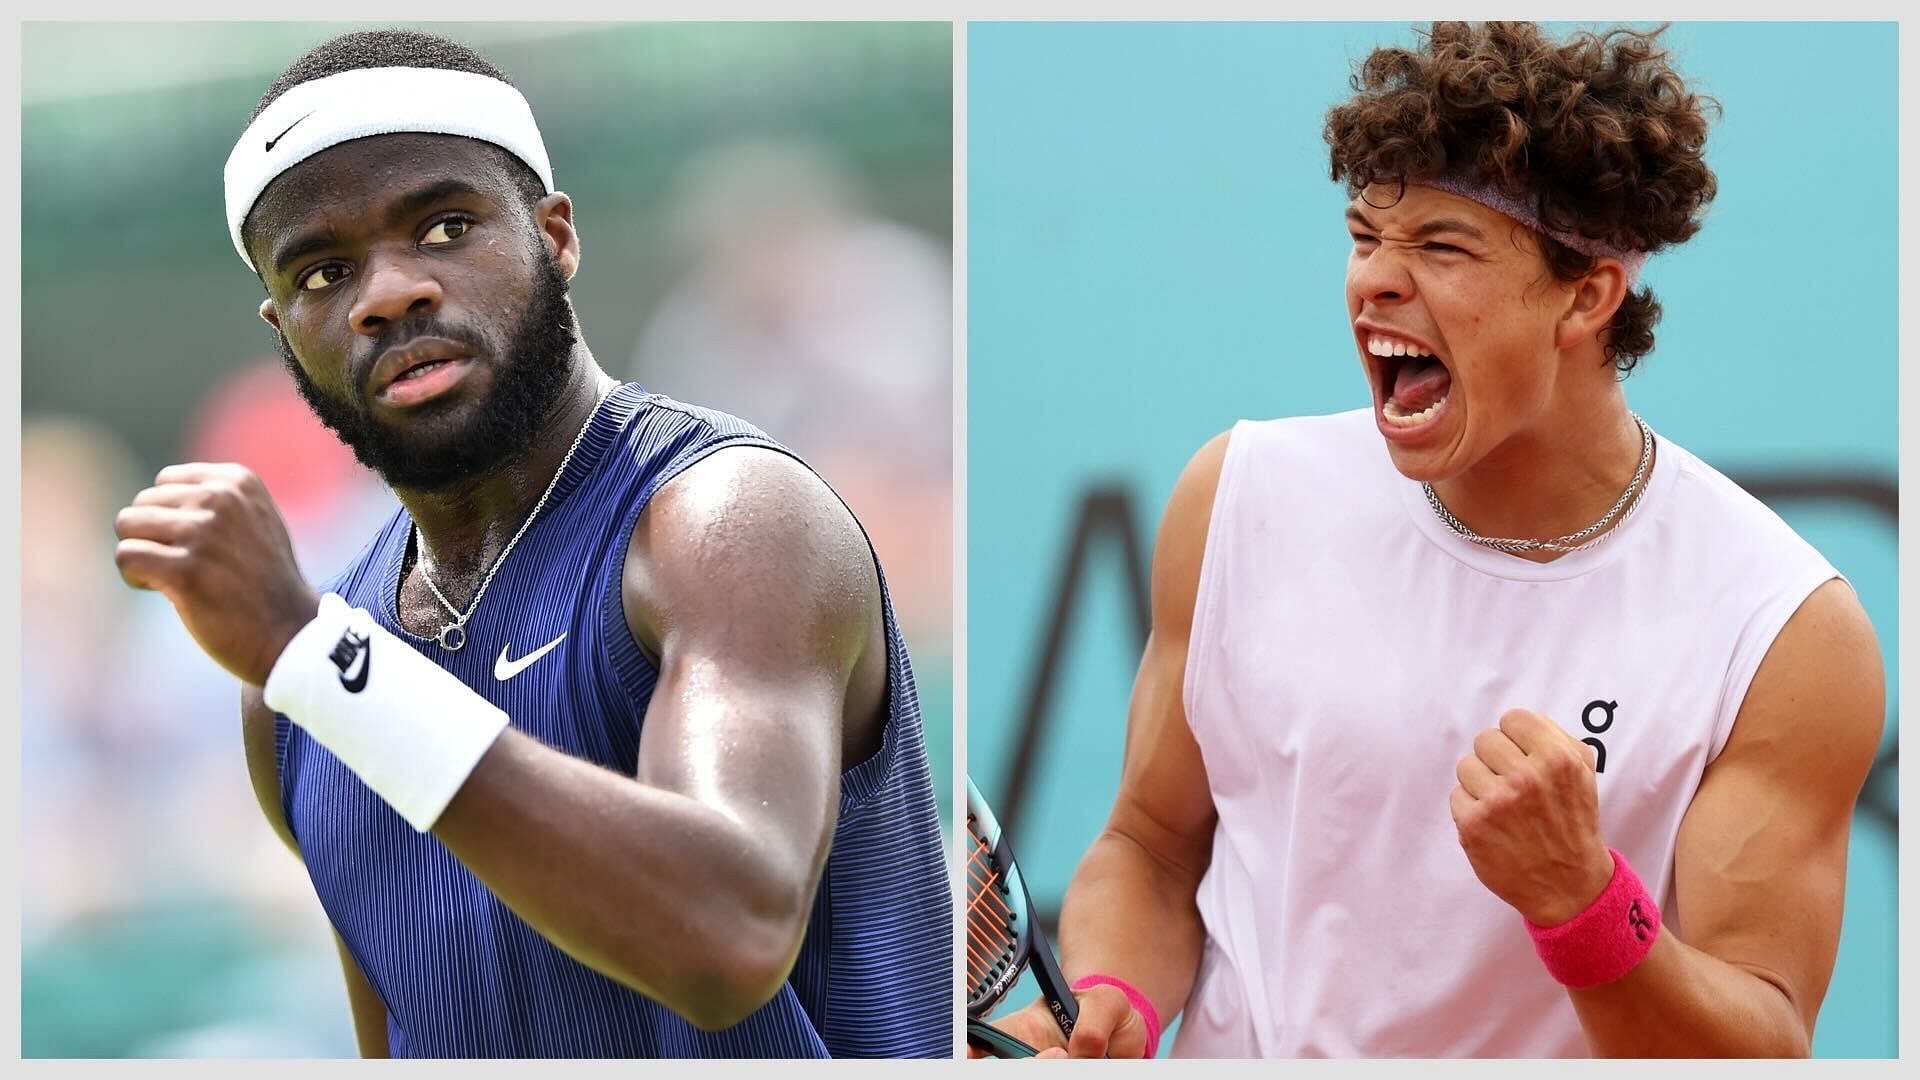 Frances Tiafoe vs Ben Shelton is one of the quarterfinal matches at the 2023 US Open.